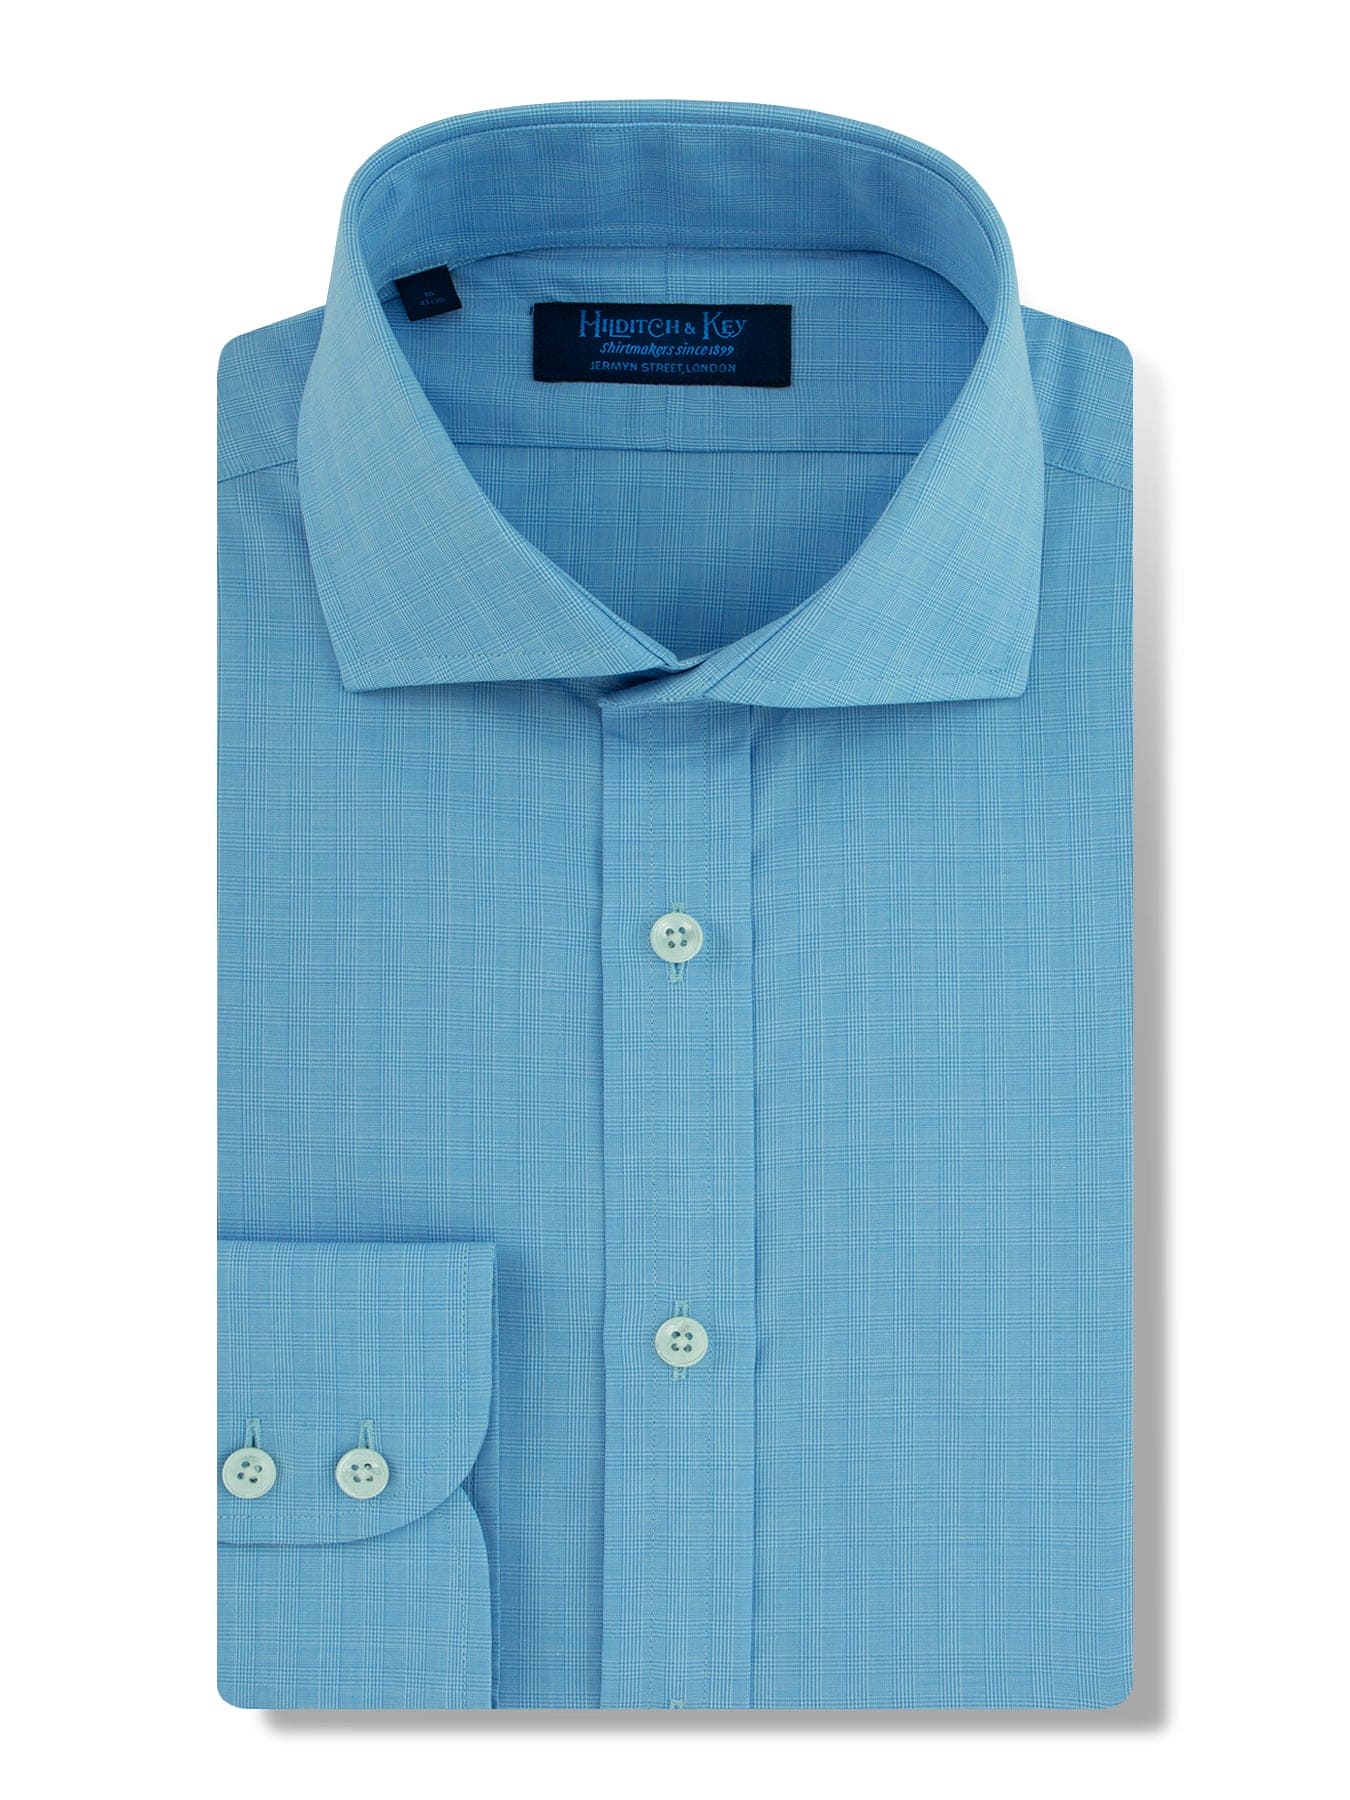 Contemporary Fit, Cutaway Collar, Two Button Cuff in Blue & White Check